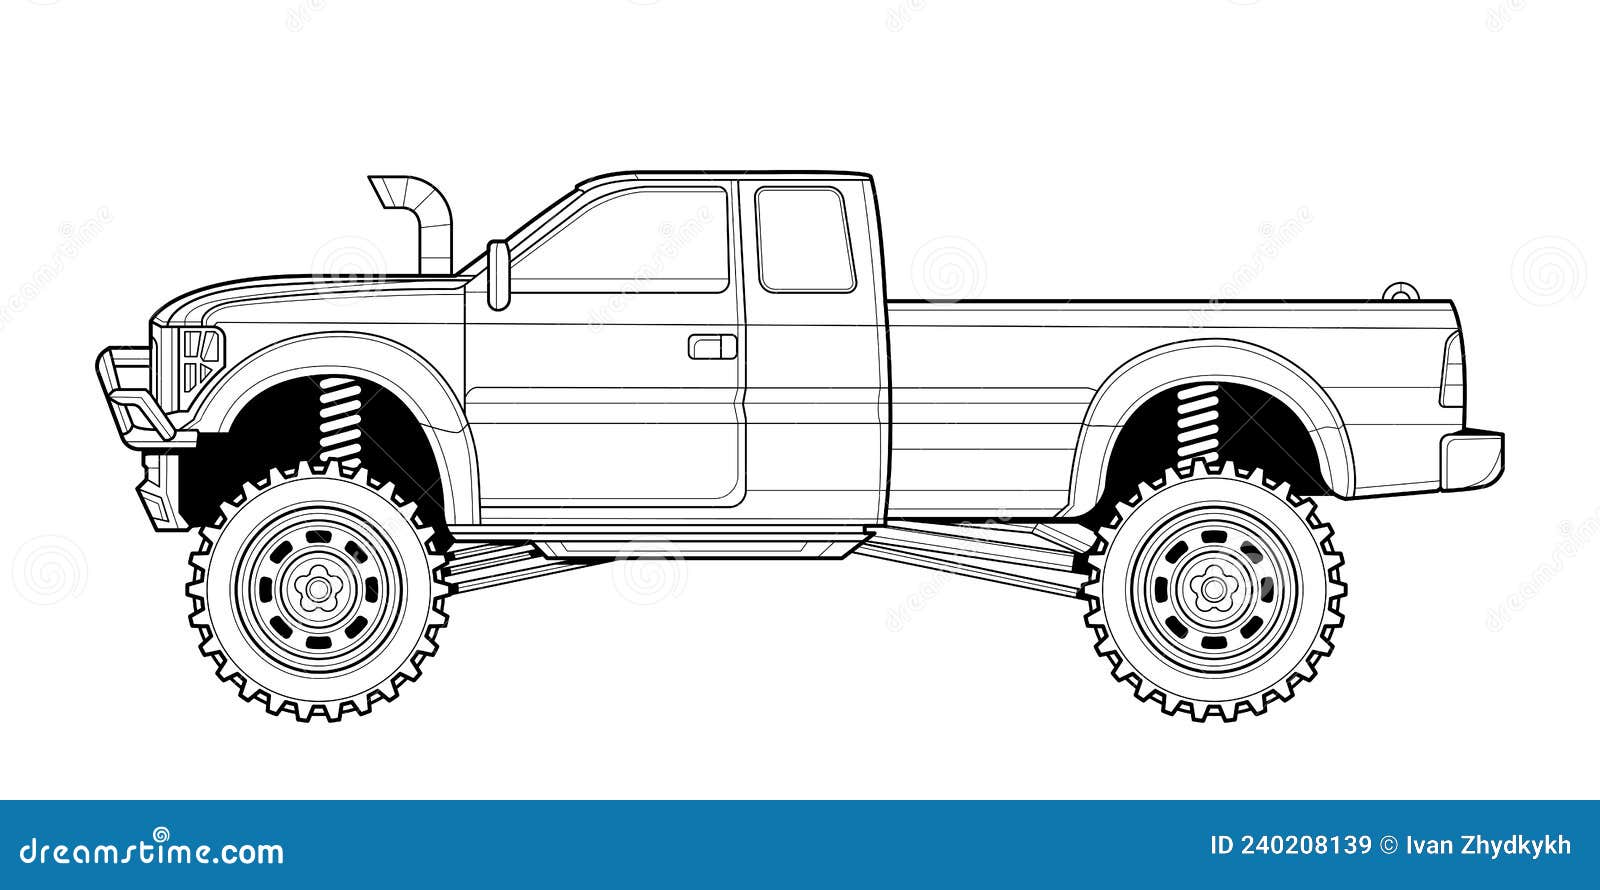 Coloring page for book and drawing offroad drive vehicle black contour sketch illustrate isolated on white background stock vector